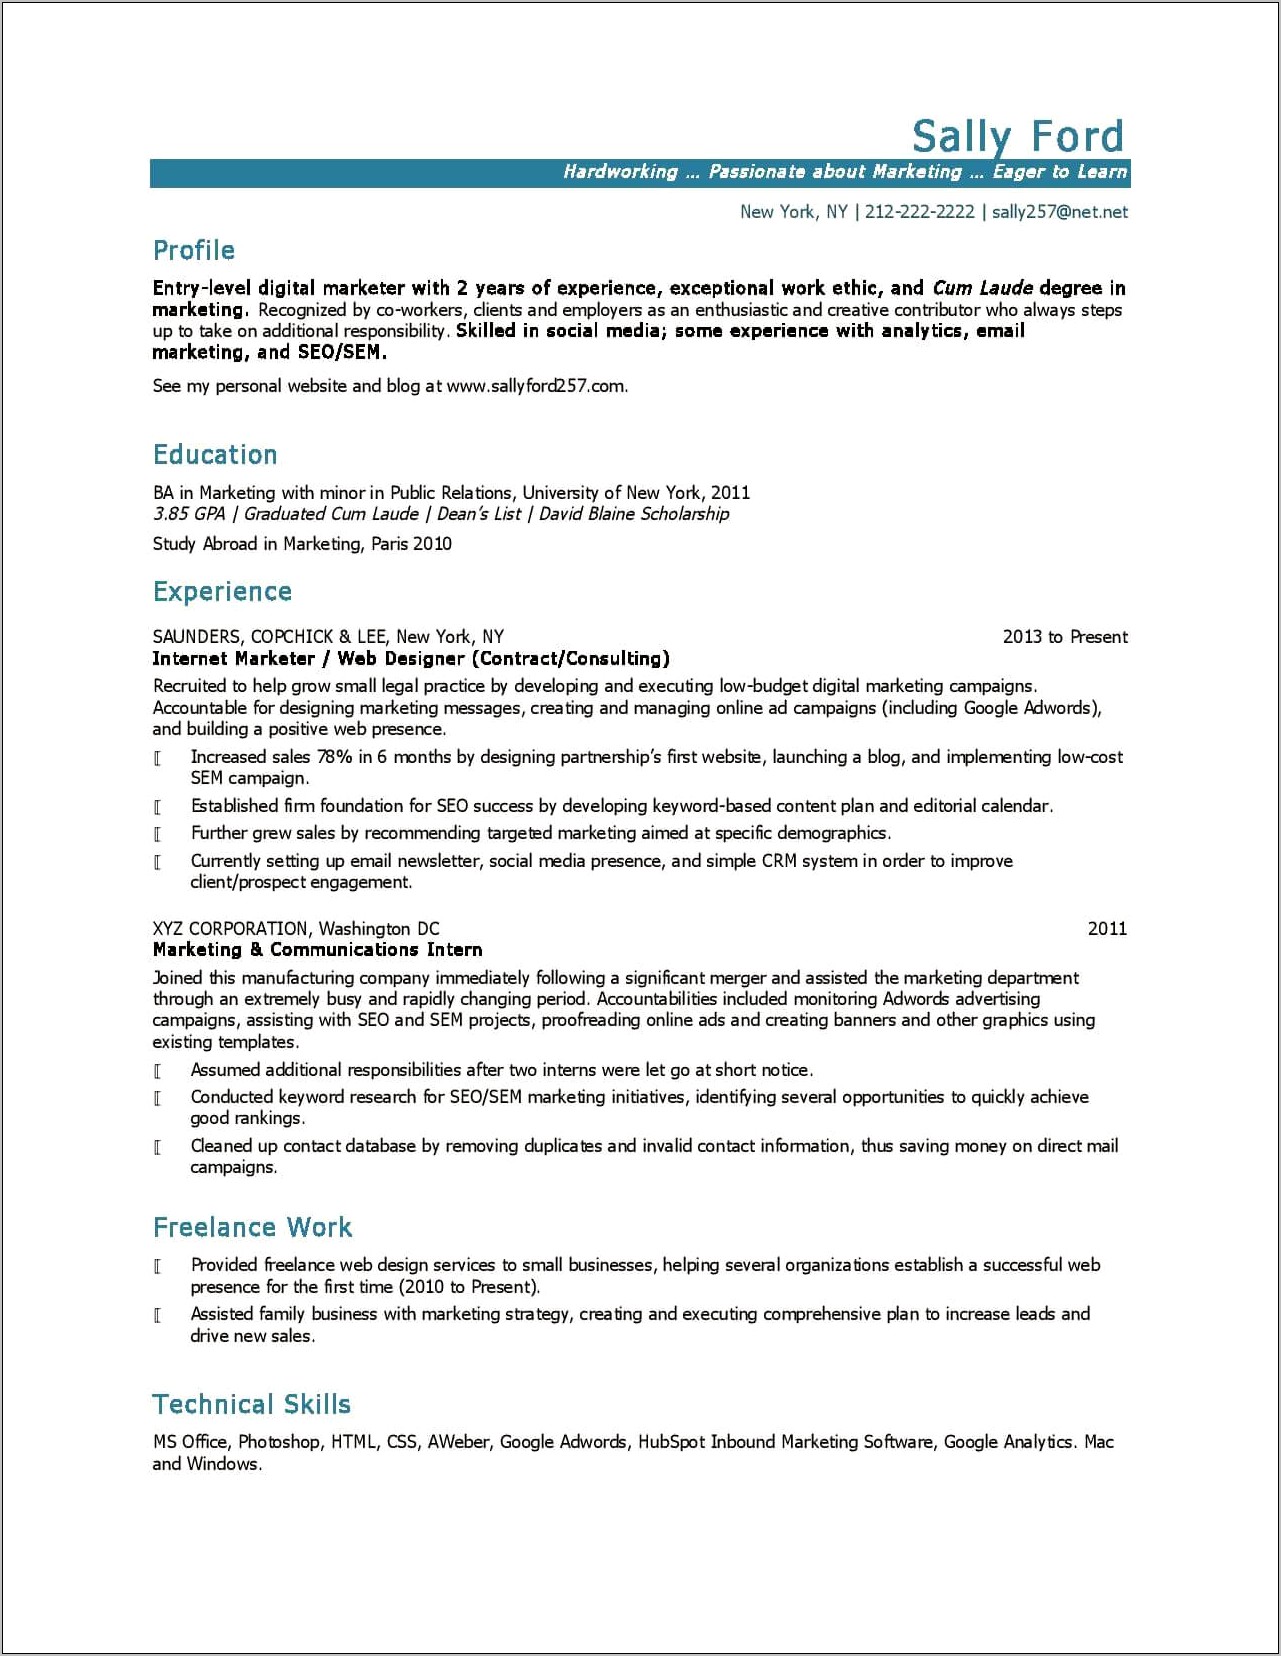 Resume Objective For Entry Level Journalism